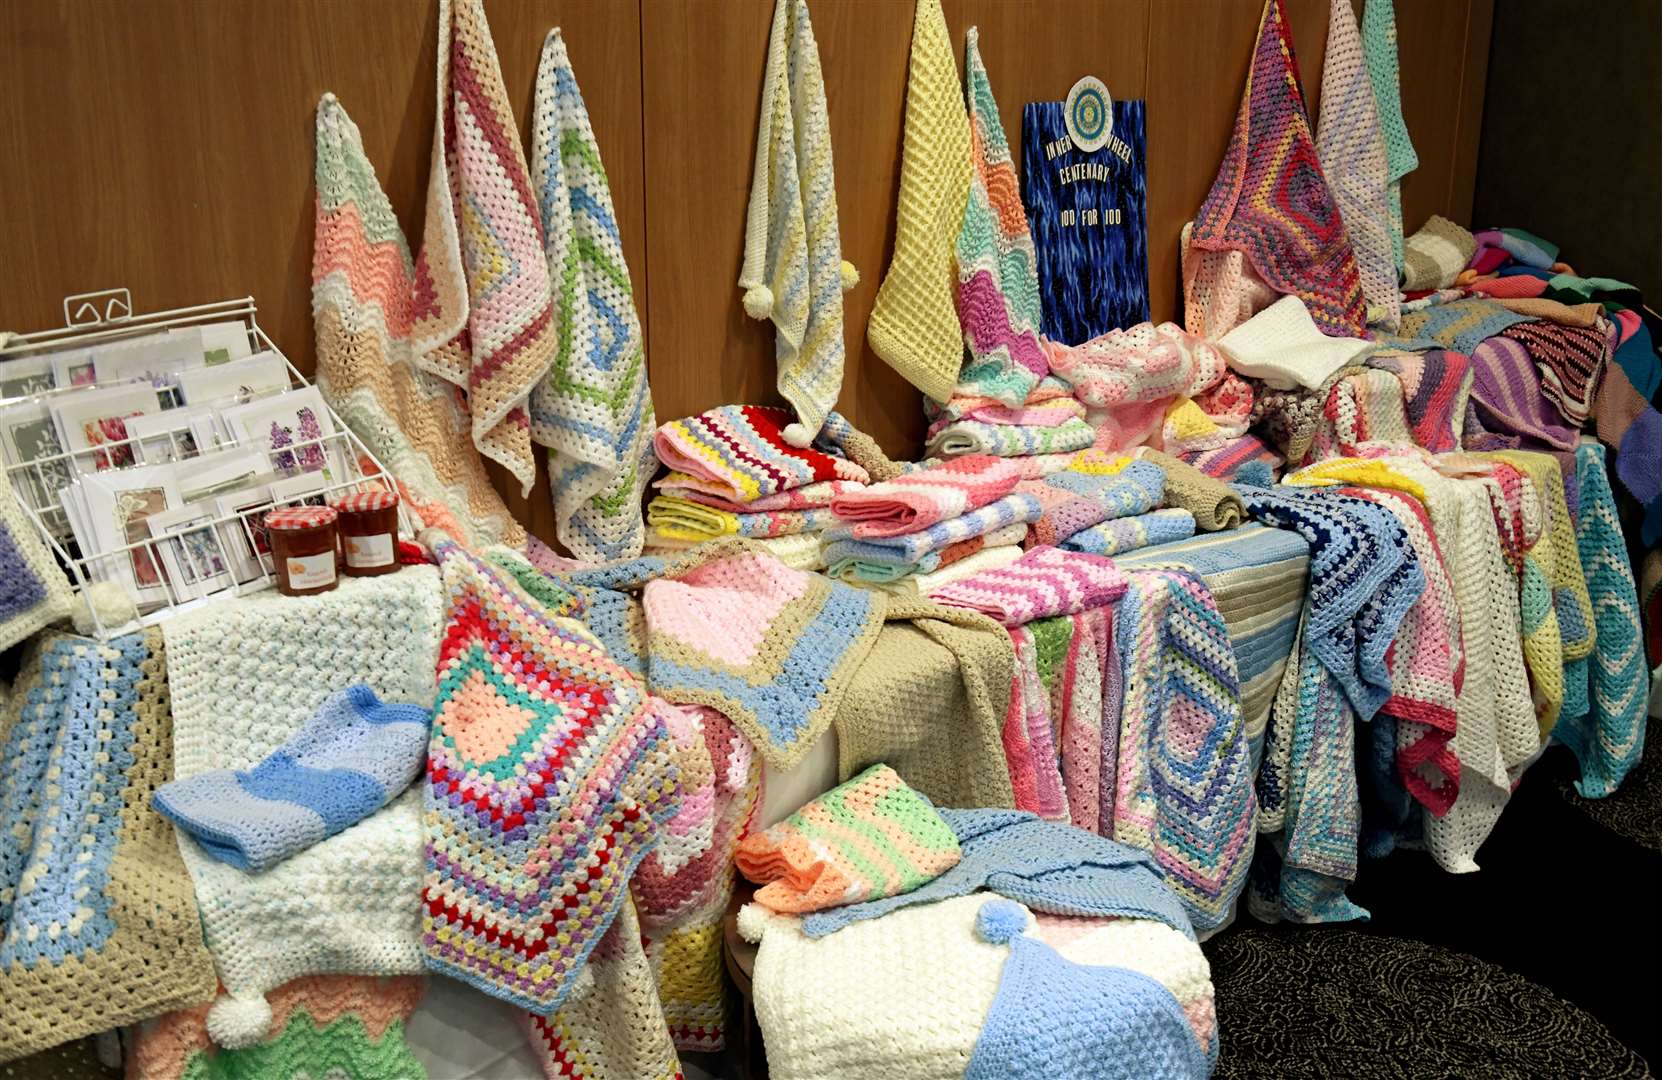 100 crocheted baby blankets. Picture: James Mackenzie